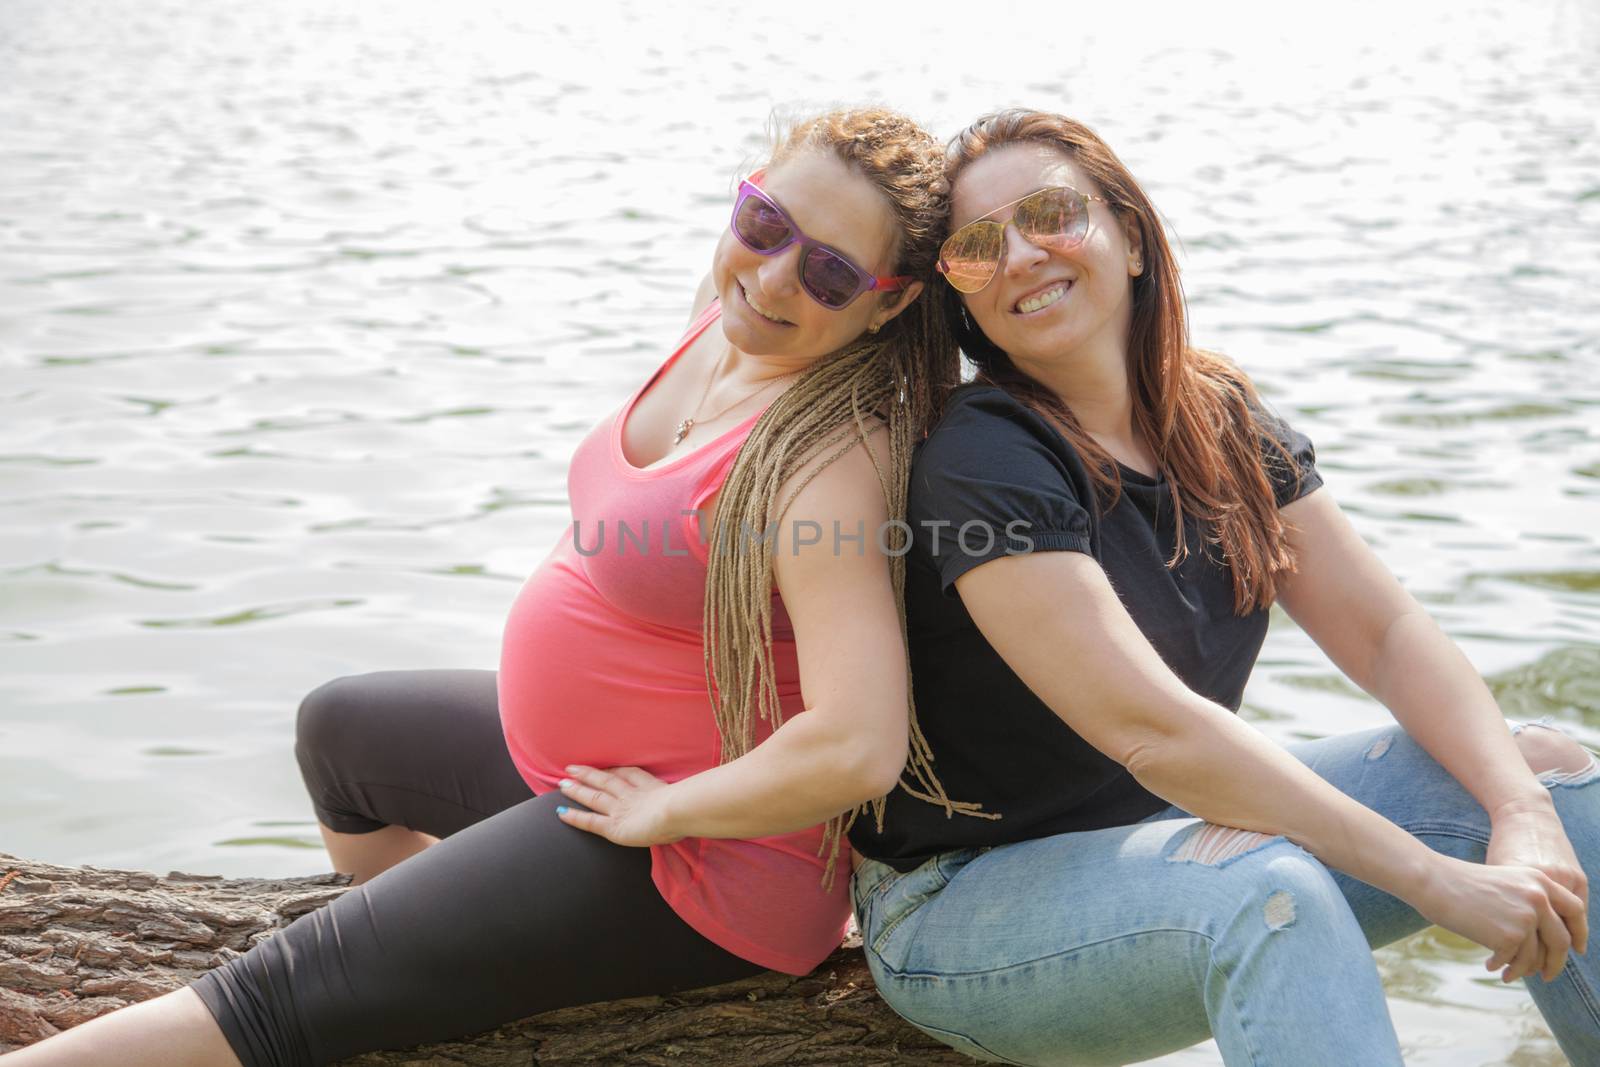 Girlfriends are sitting on a wooden log in front of water, one female is pregnant.